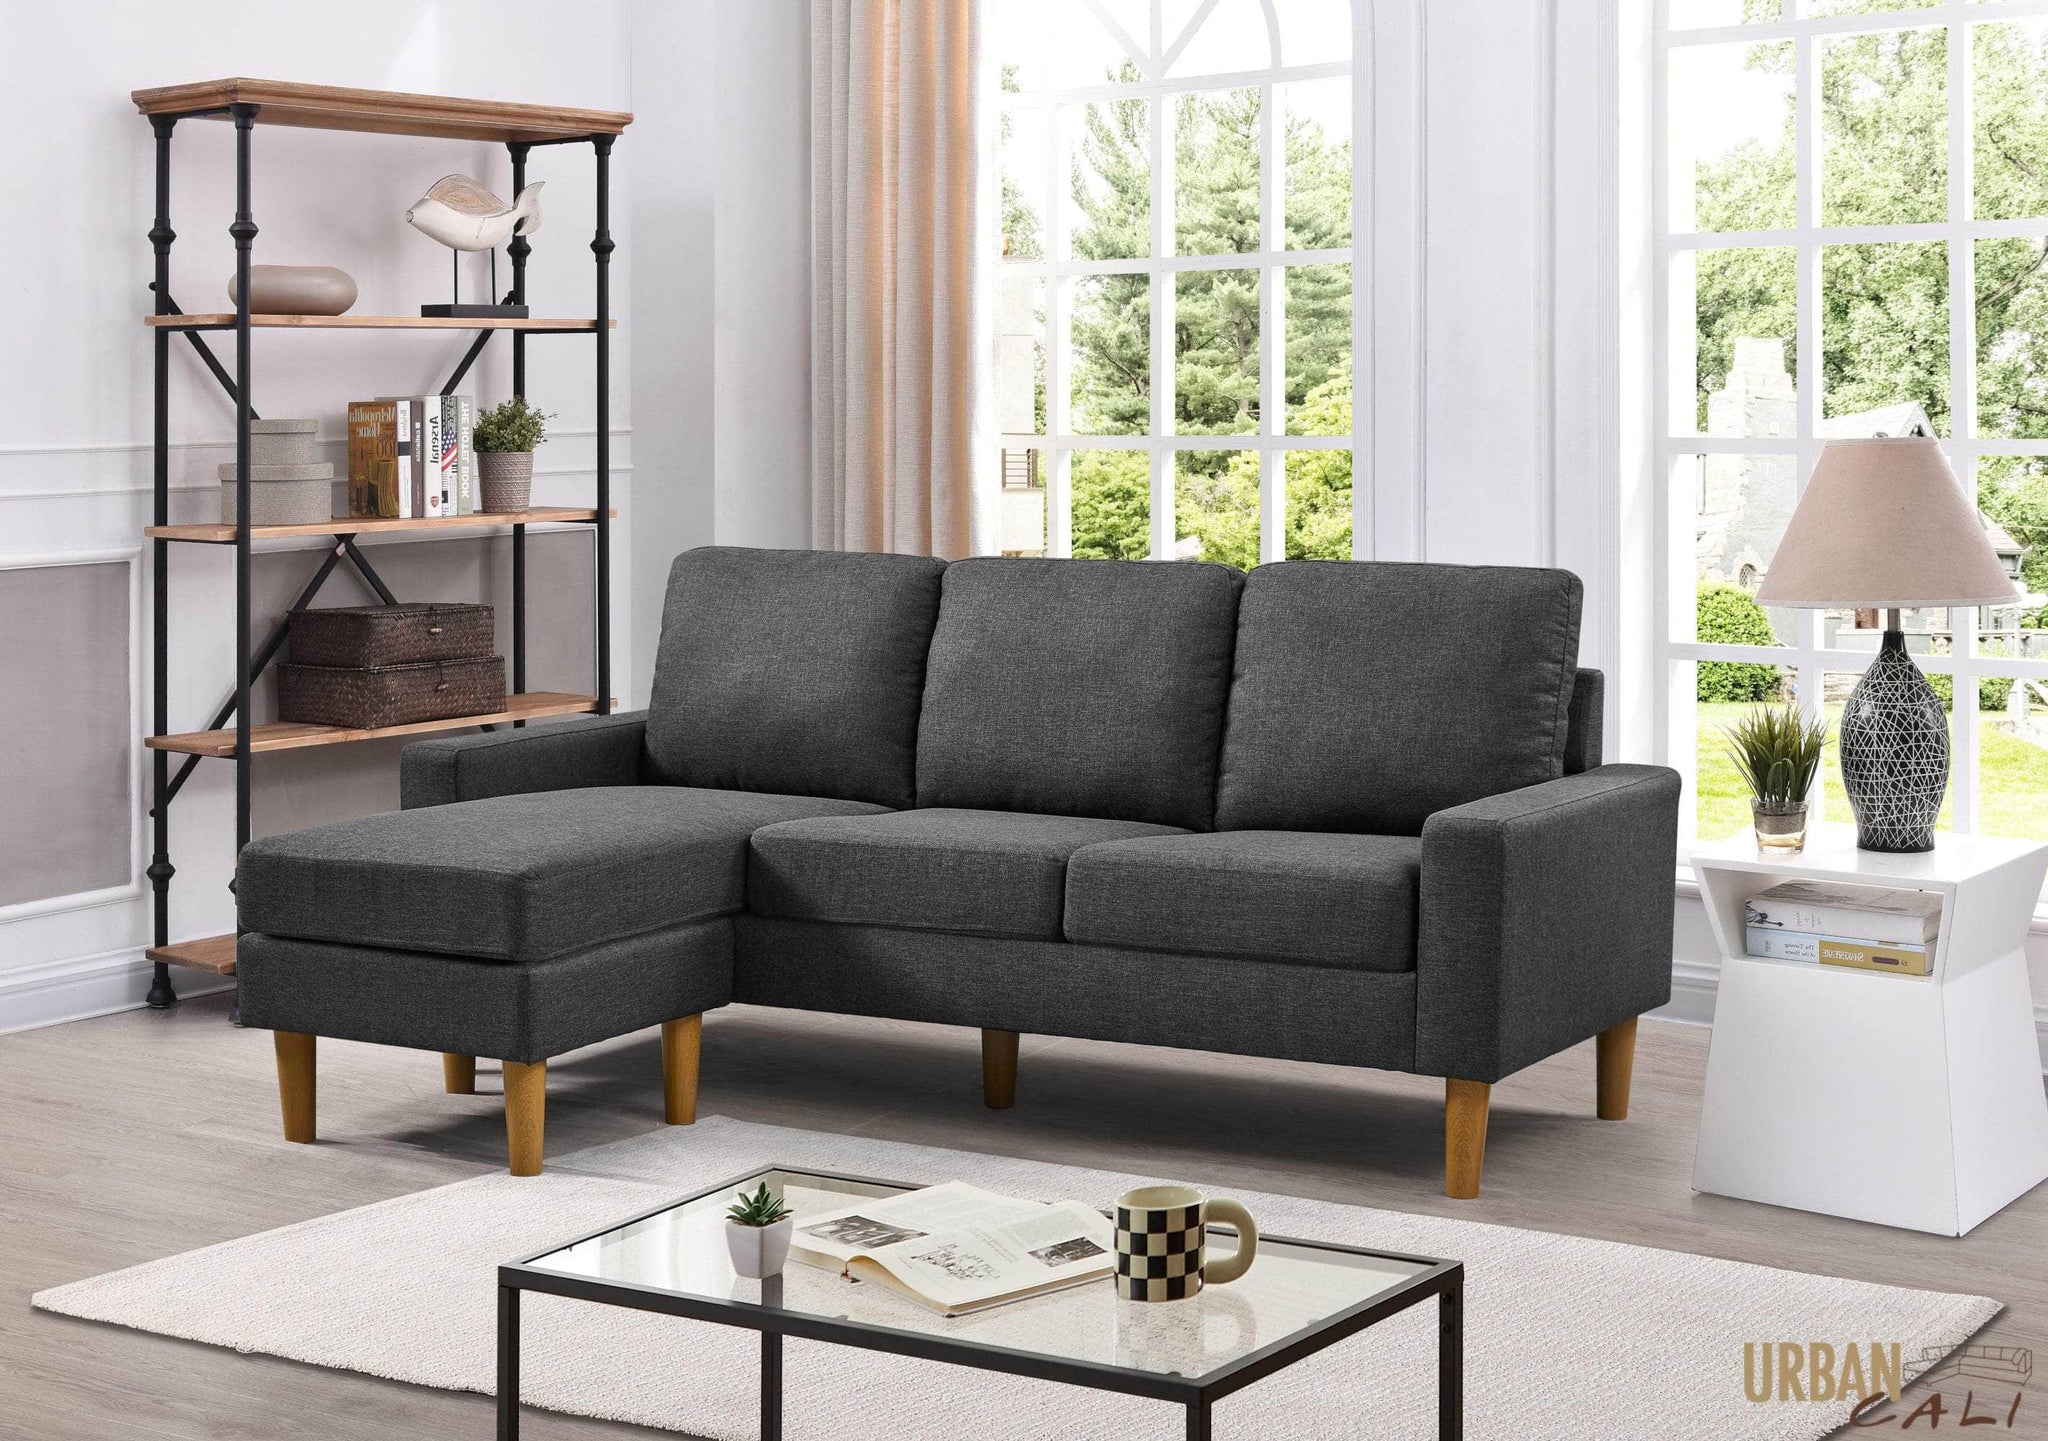 Urban Cali Sectional San Francisco 74 8 Wide Sectional Sofa With Reversible Chaise Available In 4 Colours 29890504261694 2048x1444 ?v=1678906910